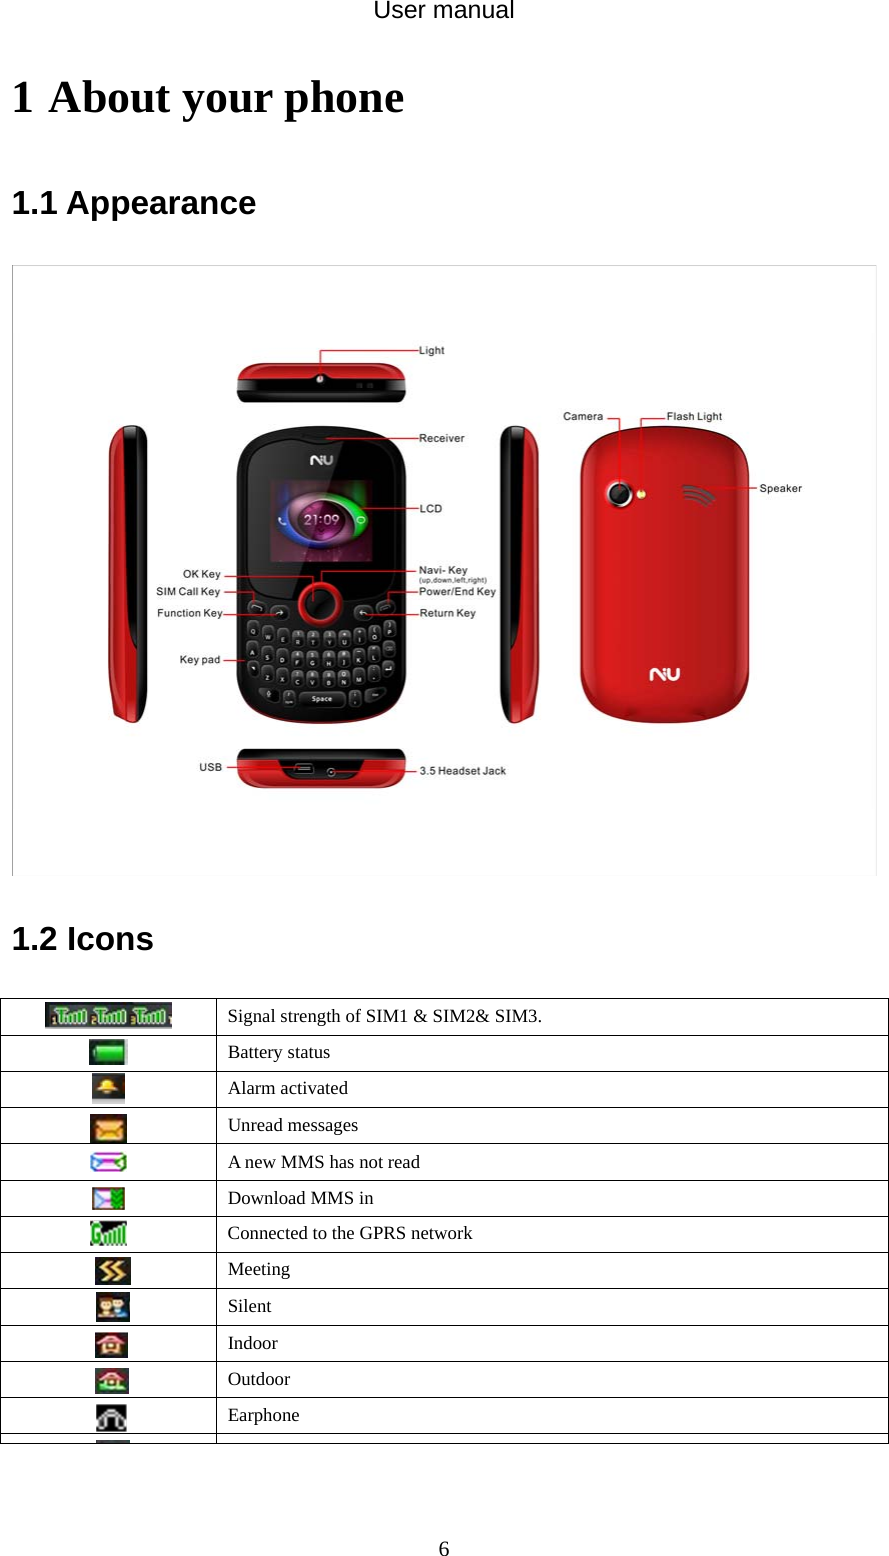 User manual  61 About your phone   1.1 Appearance    1.2 Icons  Signal strength of SIM1 &amp; SIM2&amp; SIM3.    Battery status  Alarm activated Unread messages  A new MMS has not read  Download MMS in  Connected to the GPRS network     Meeting     Silent  Indoor  Outdoor        Earphone 